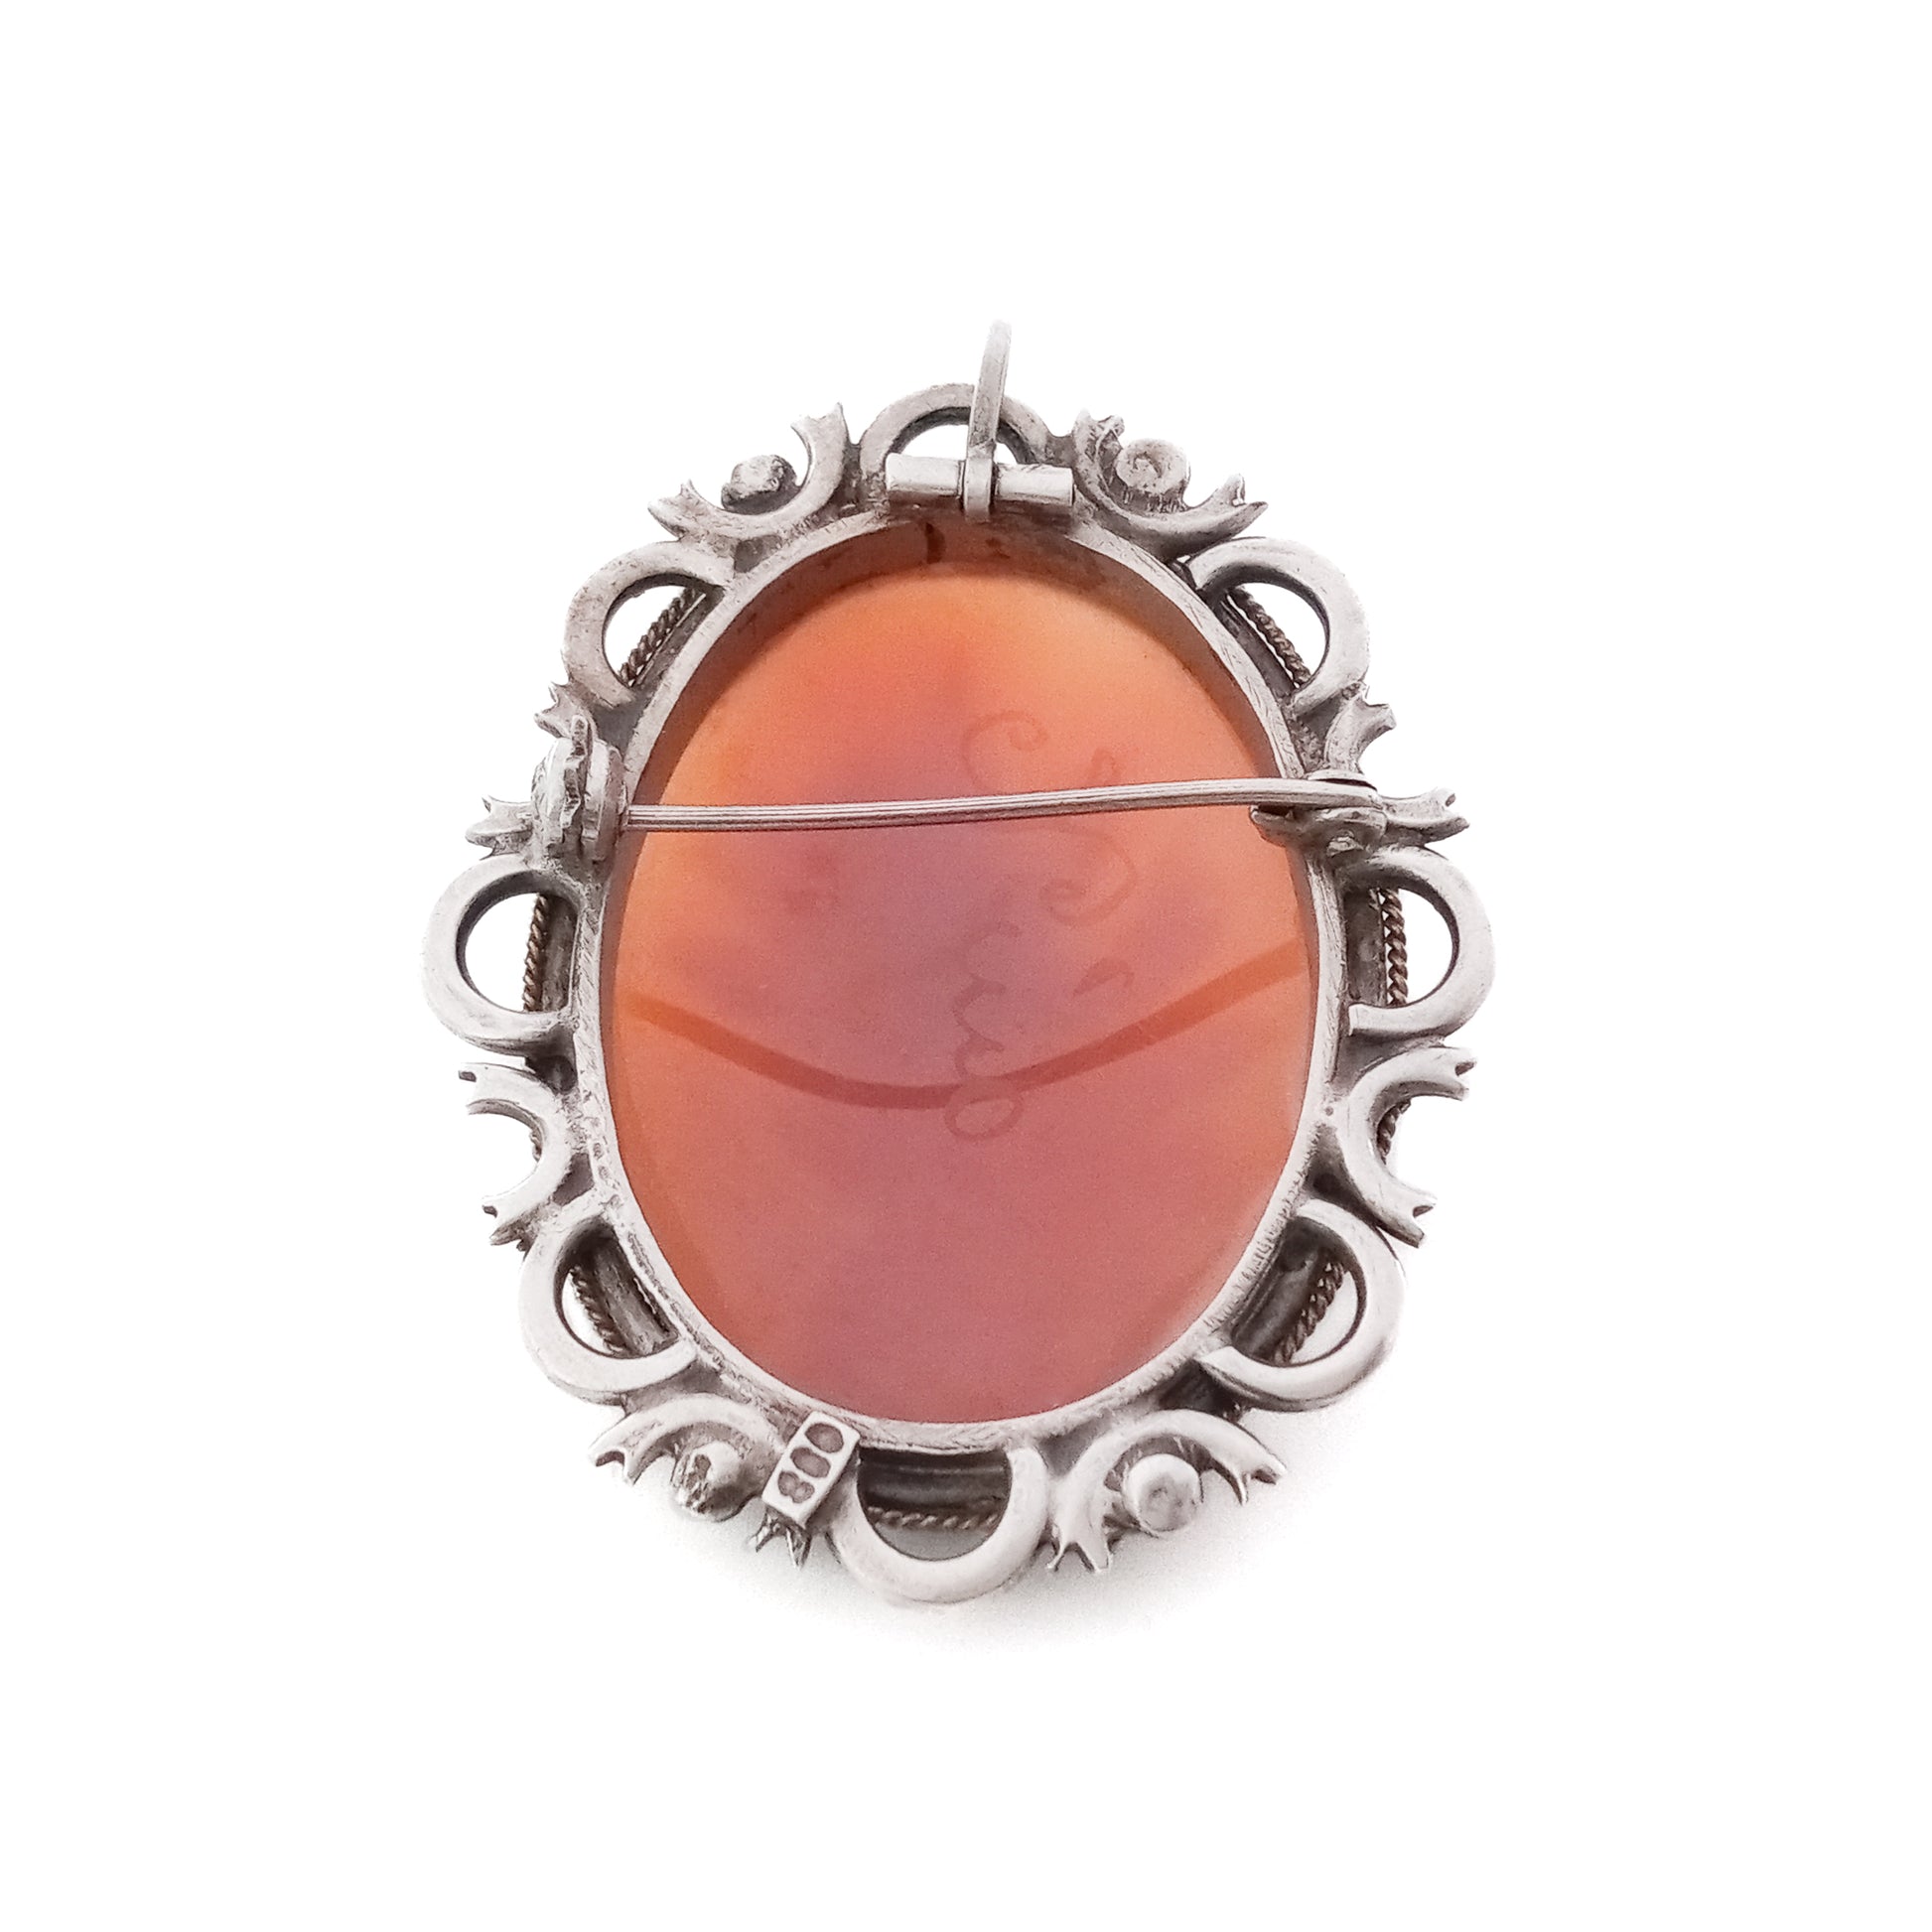 Unique silver brooch/pendant set with a beautifully carved rose cameo surrounded by marcasites. Circa 1930s